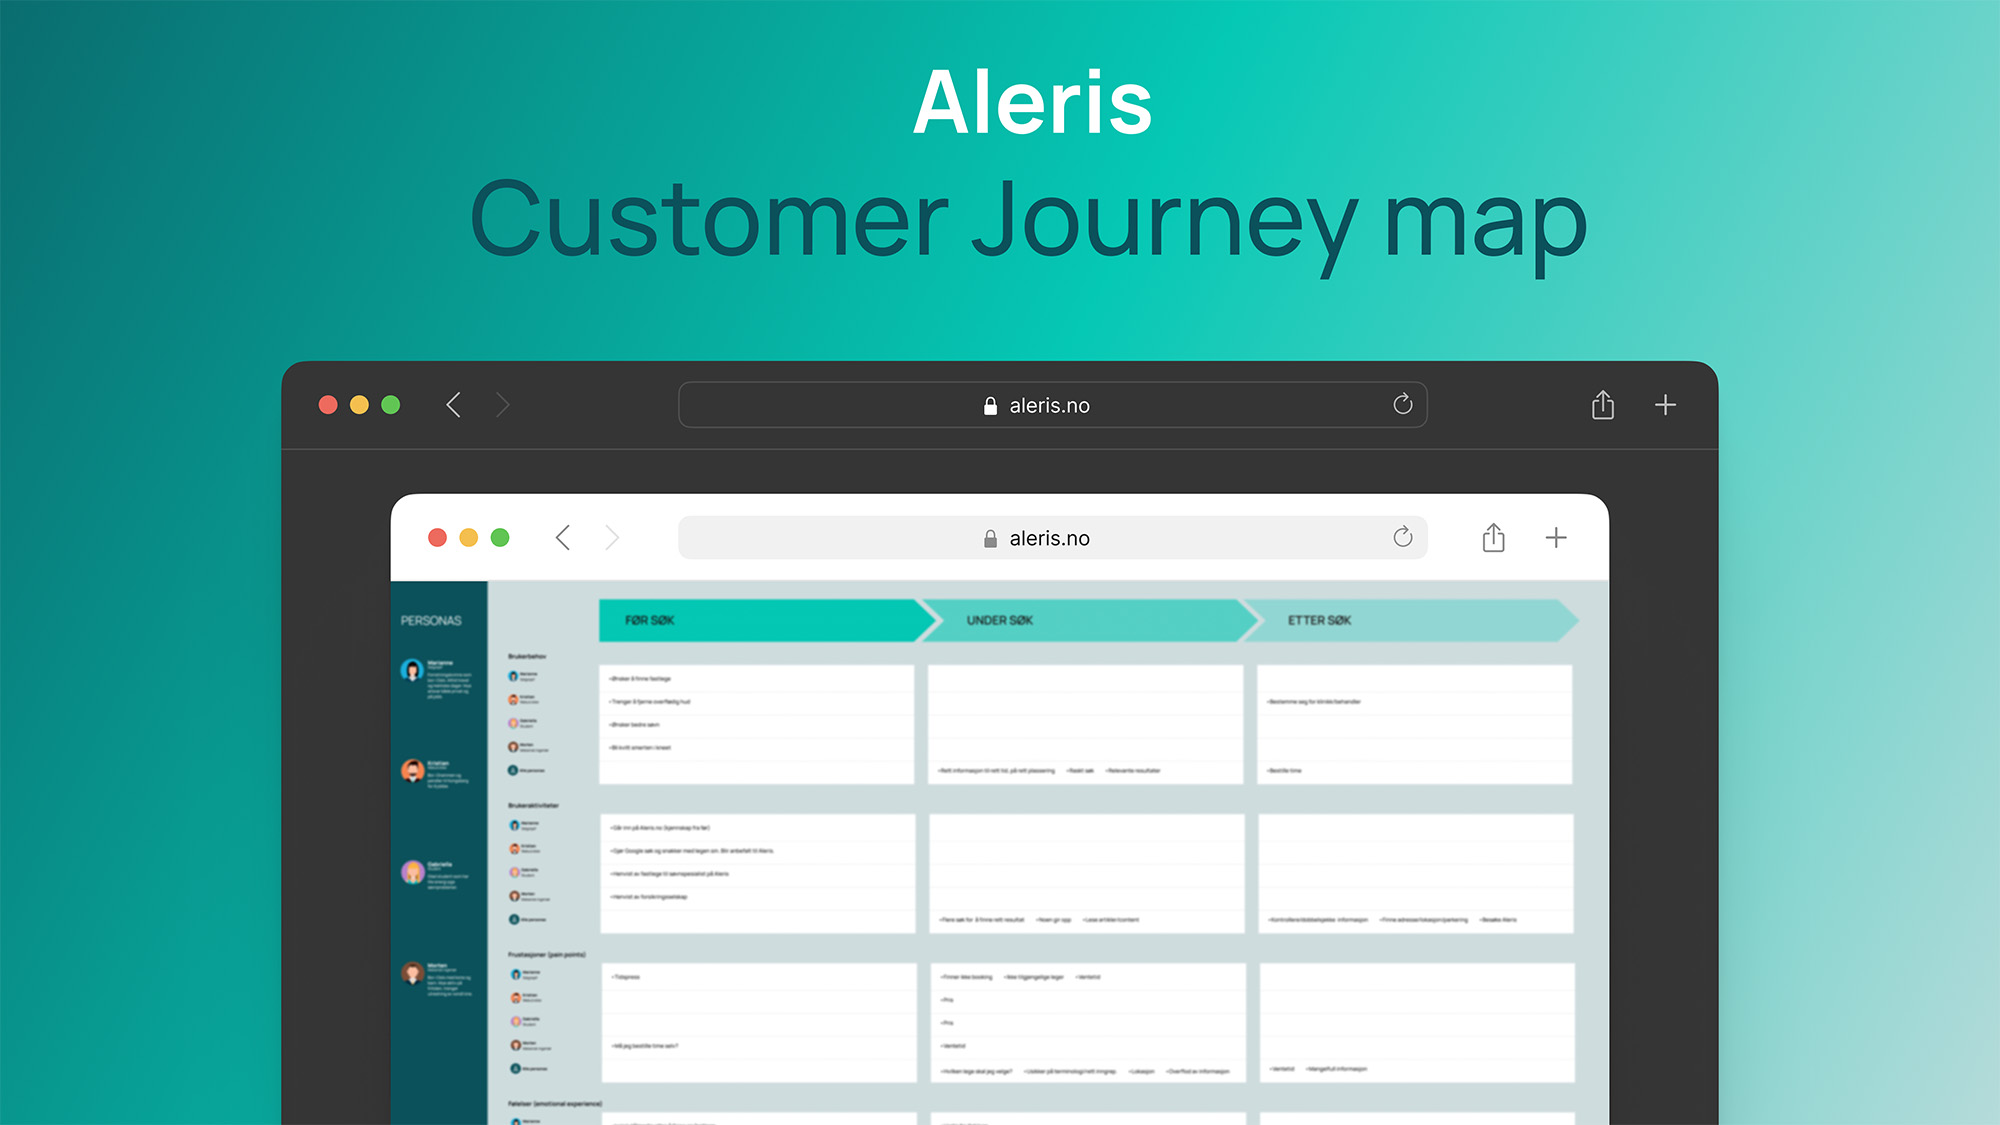 Image of a customer journey map